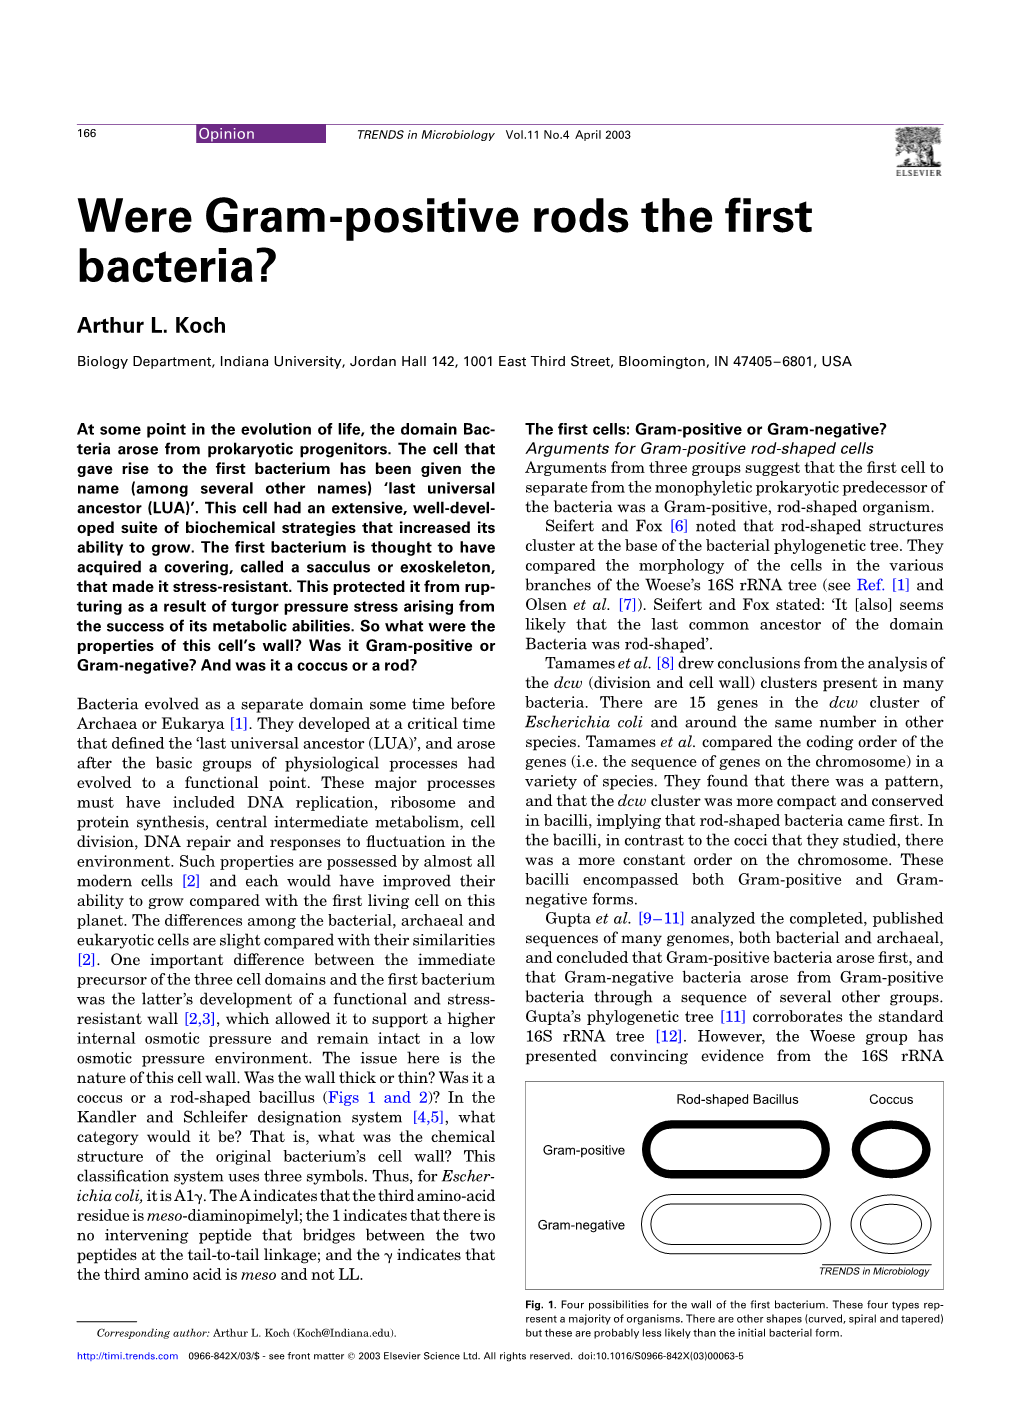 Were Gram-Positive Rods the First Bacteria?